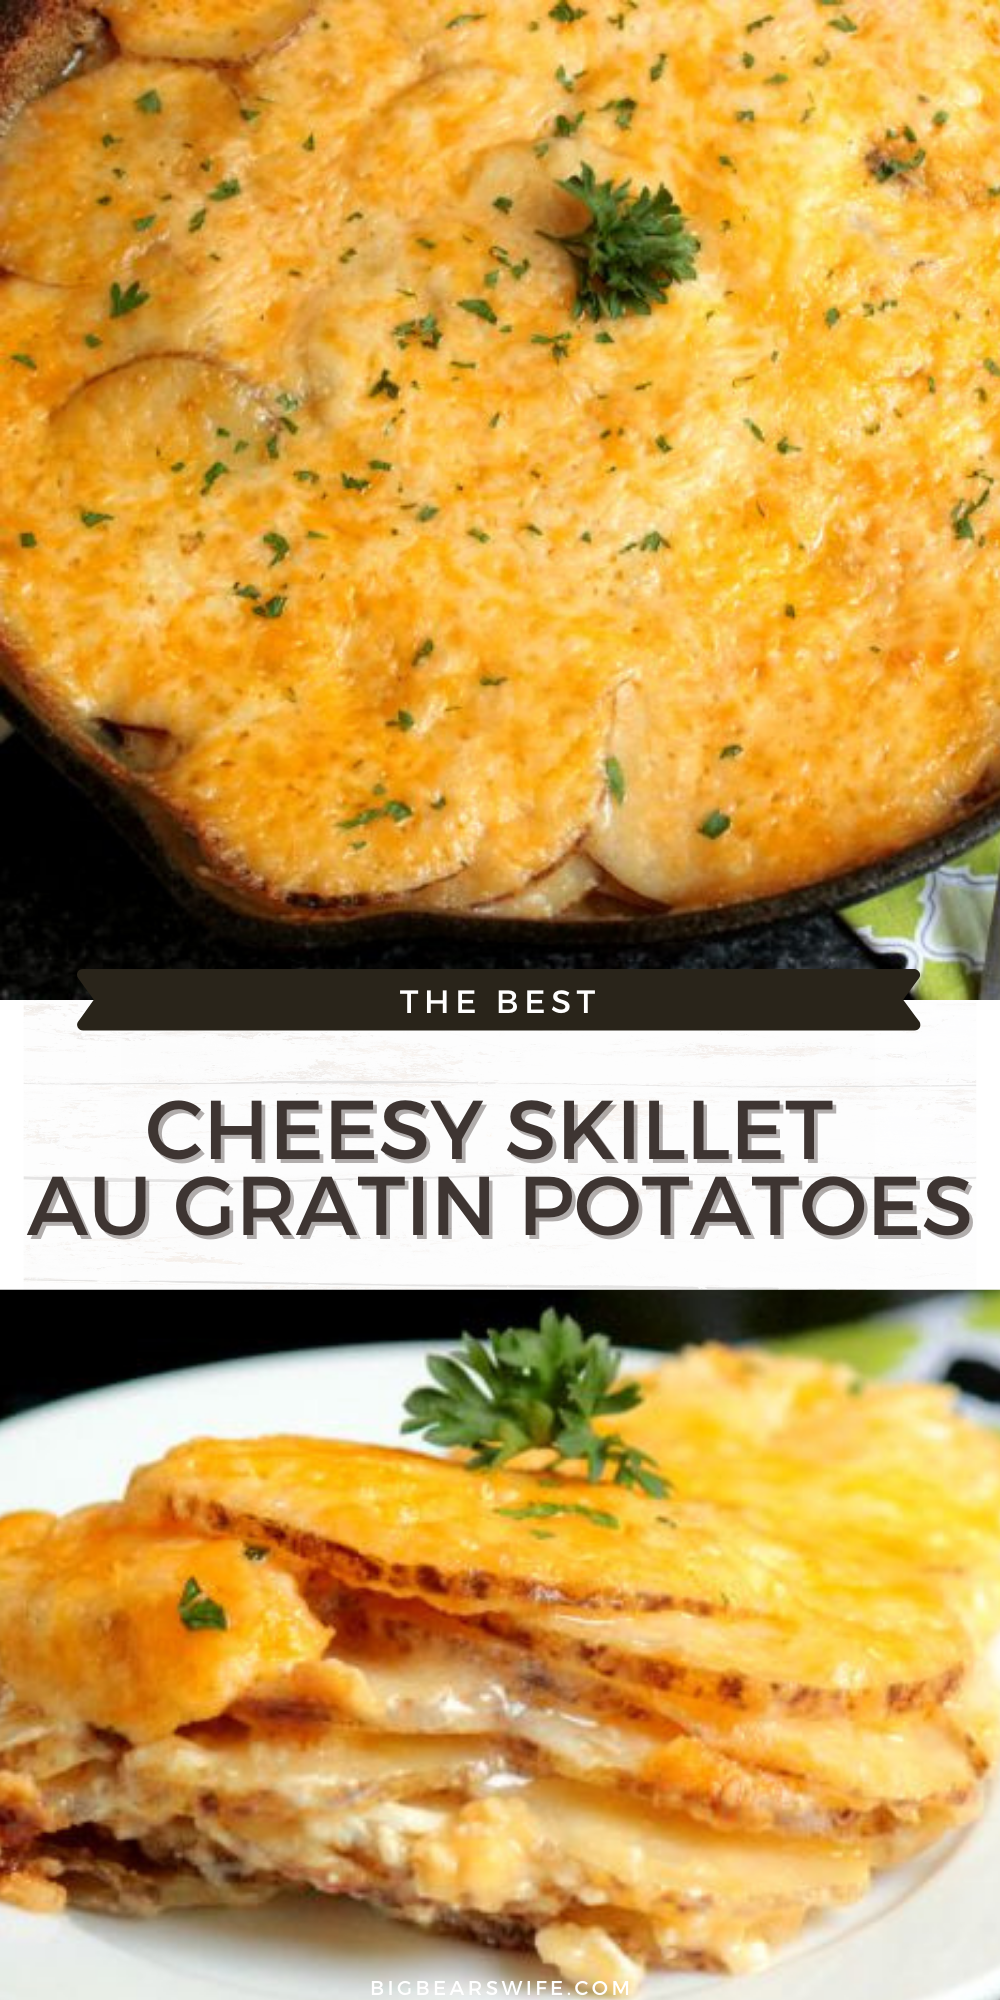 The Cheesy Skillet Au Gratin Potatoes are piled high in a cast iron skillet which means they can be cooked in the oven or in a covered grill via @bigbearswife